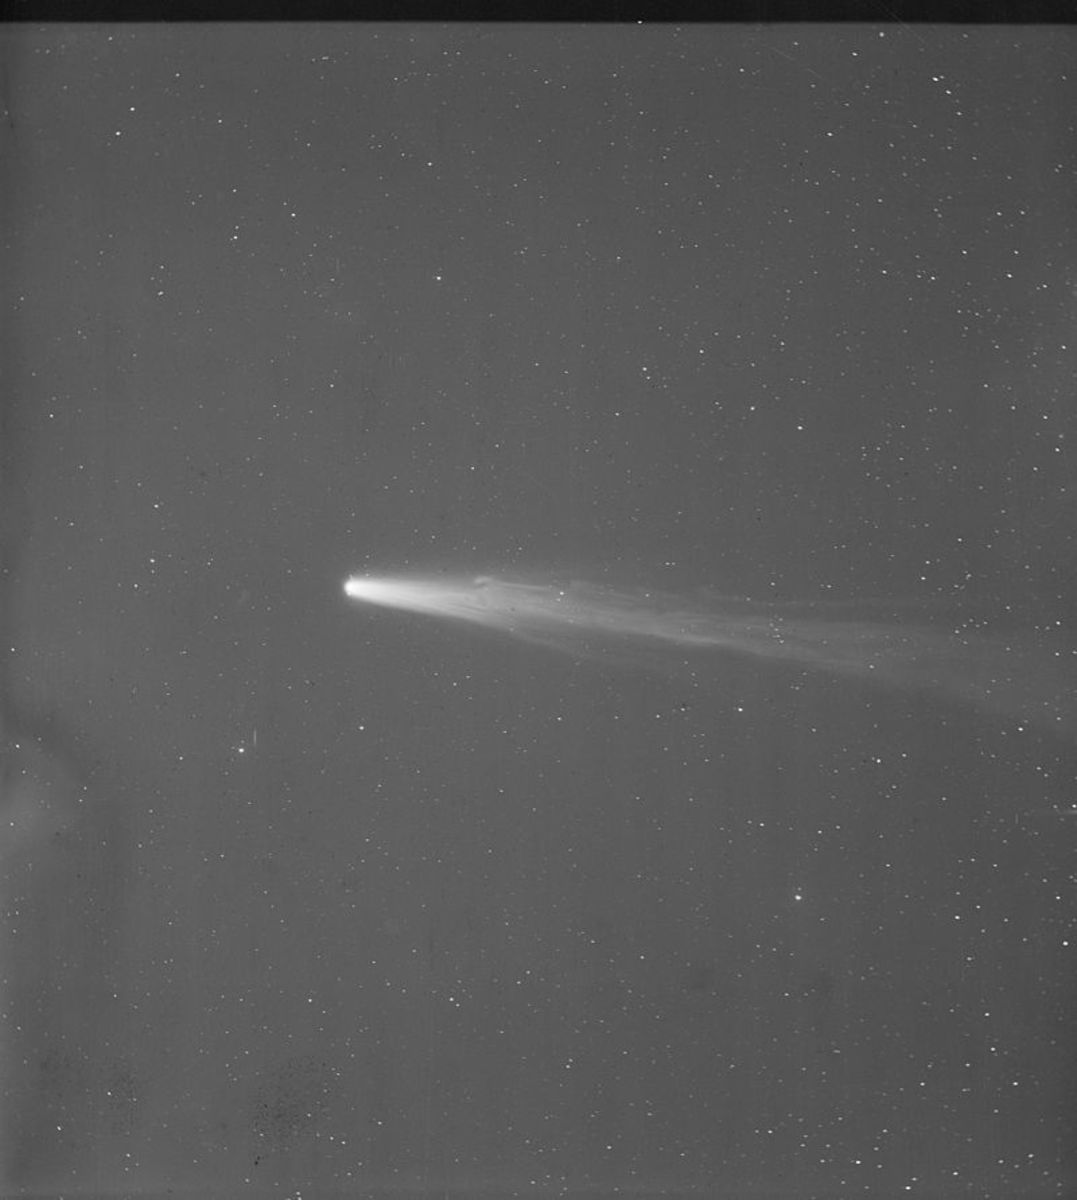 Halley's comet as it appeared from Earth in 1910